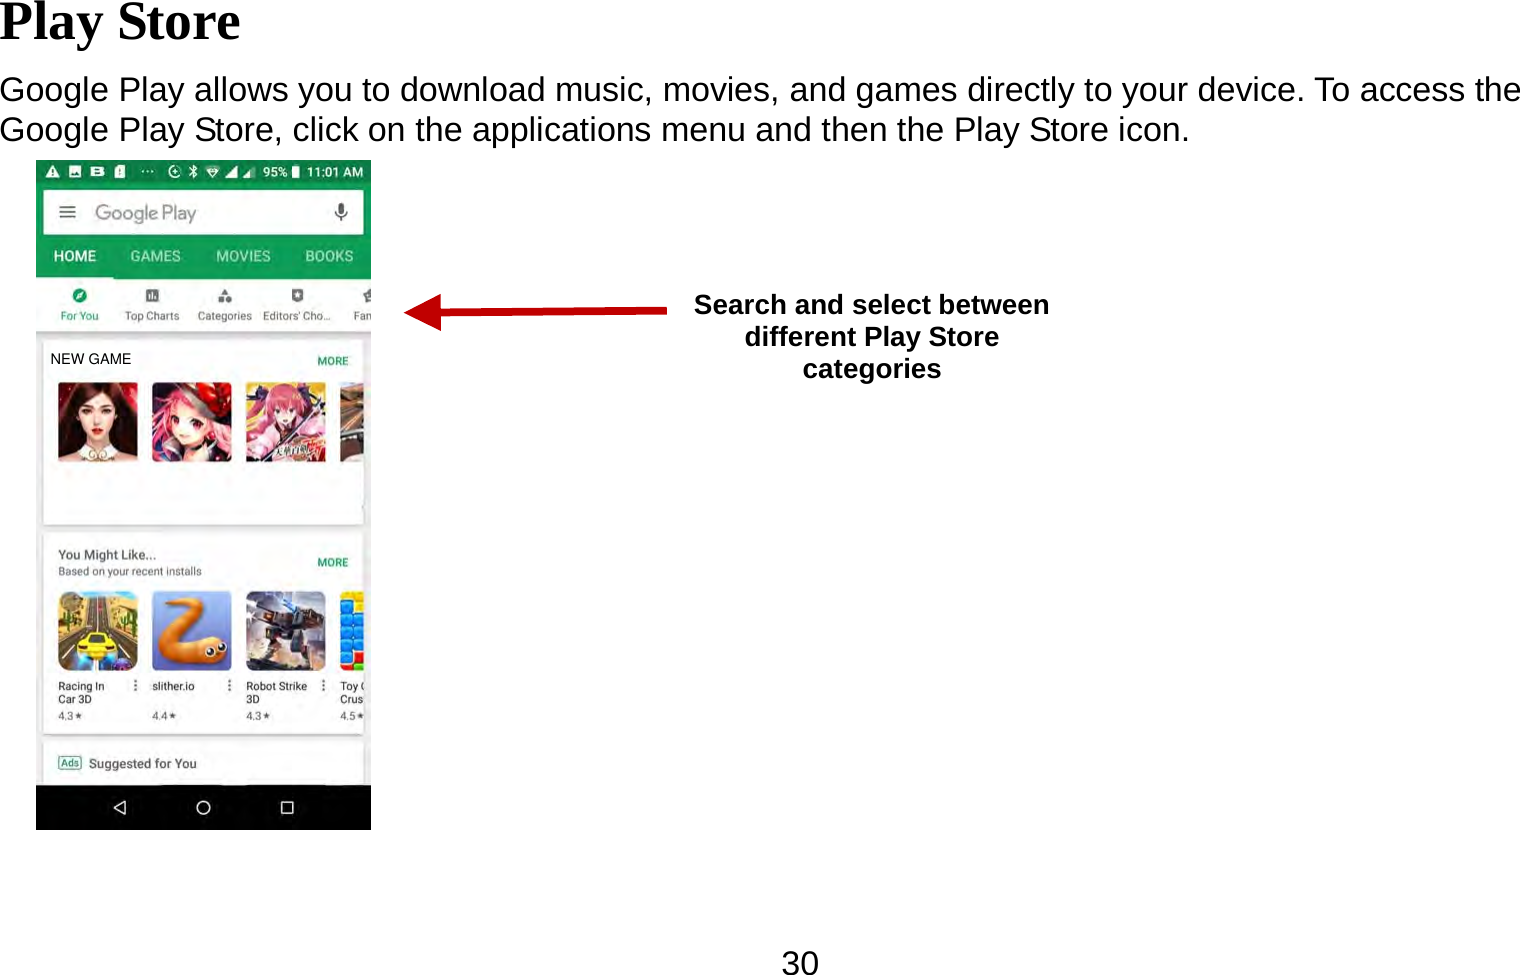   30Play Store Google Play allows you to download music, movies, and games directly to your device. To access the Google Play Store, click on the applications menu and then the Play Store icon.   Search and select between different Play Store categories NEW GAME